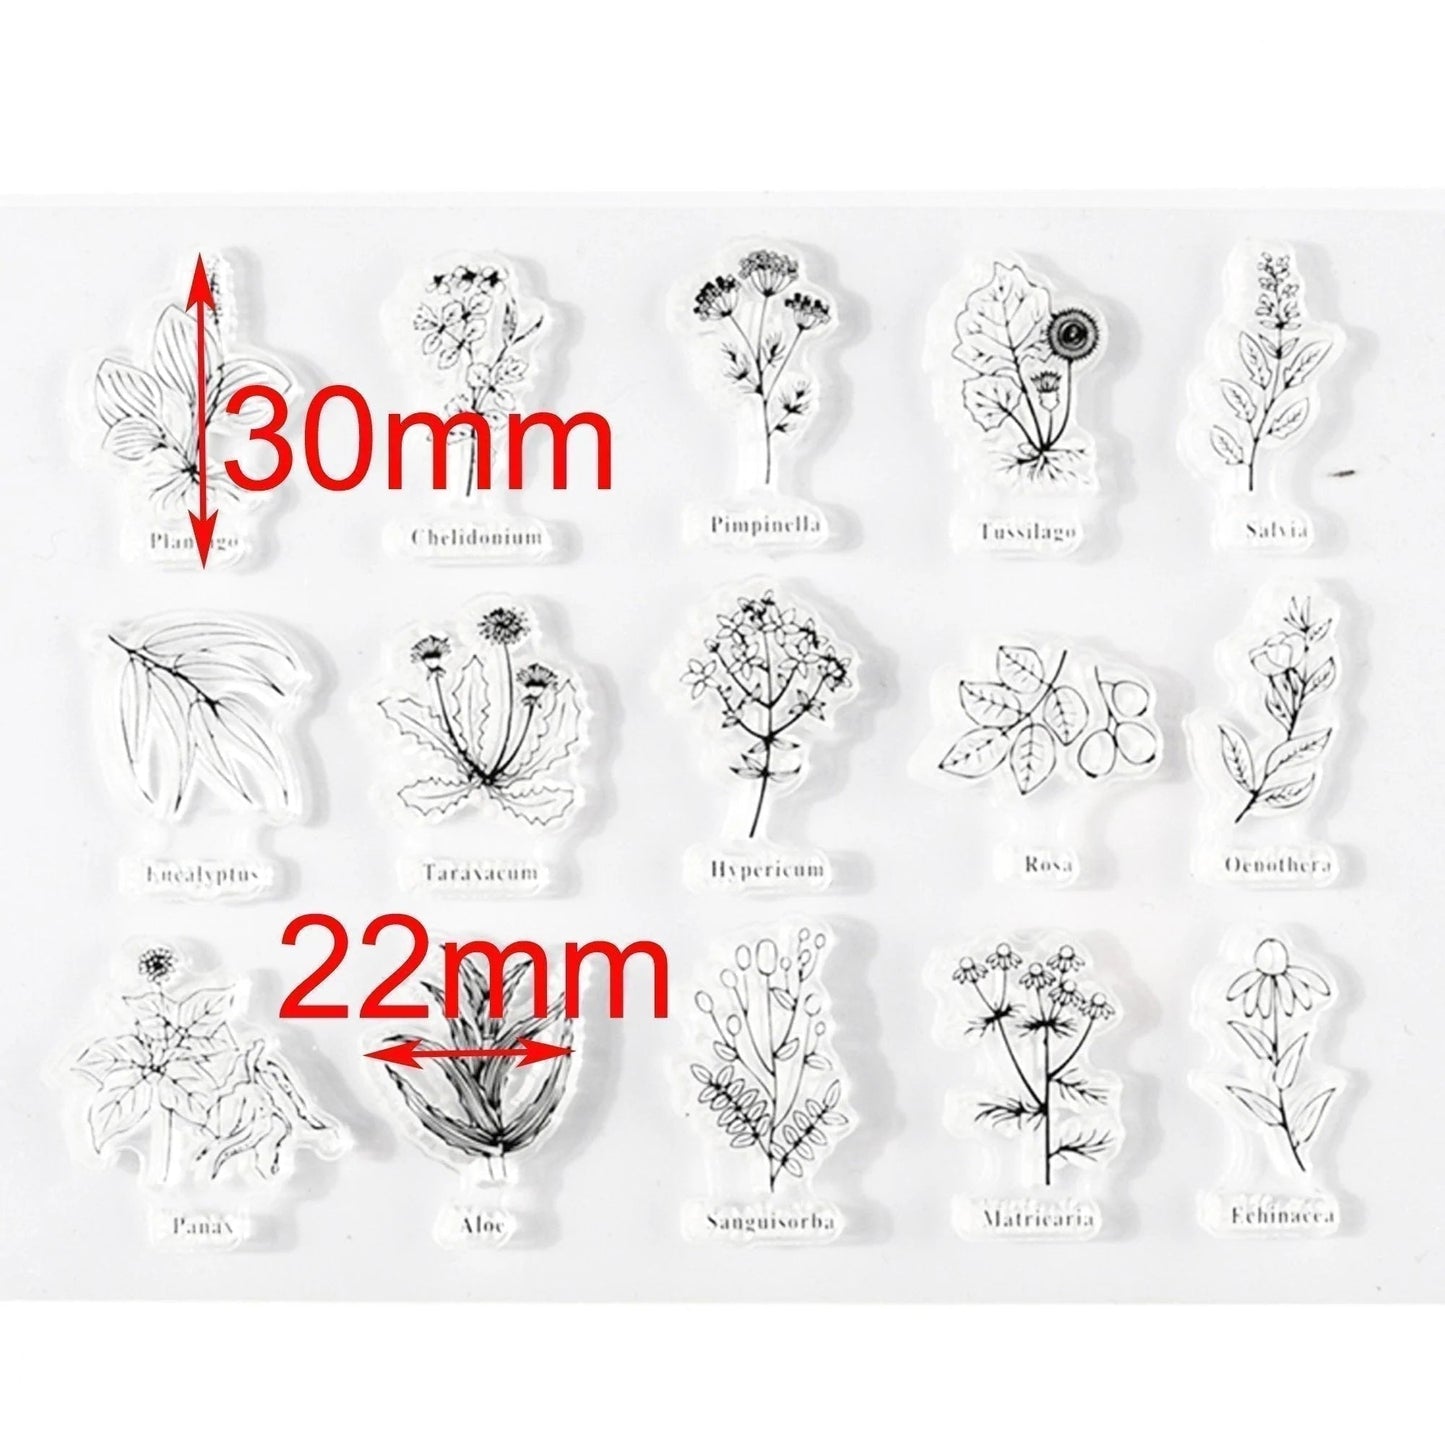 Mini Botanical Plants Clear Stamp Silicone Rubber Scrapbooking Card Making